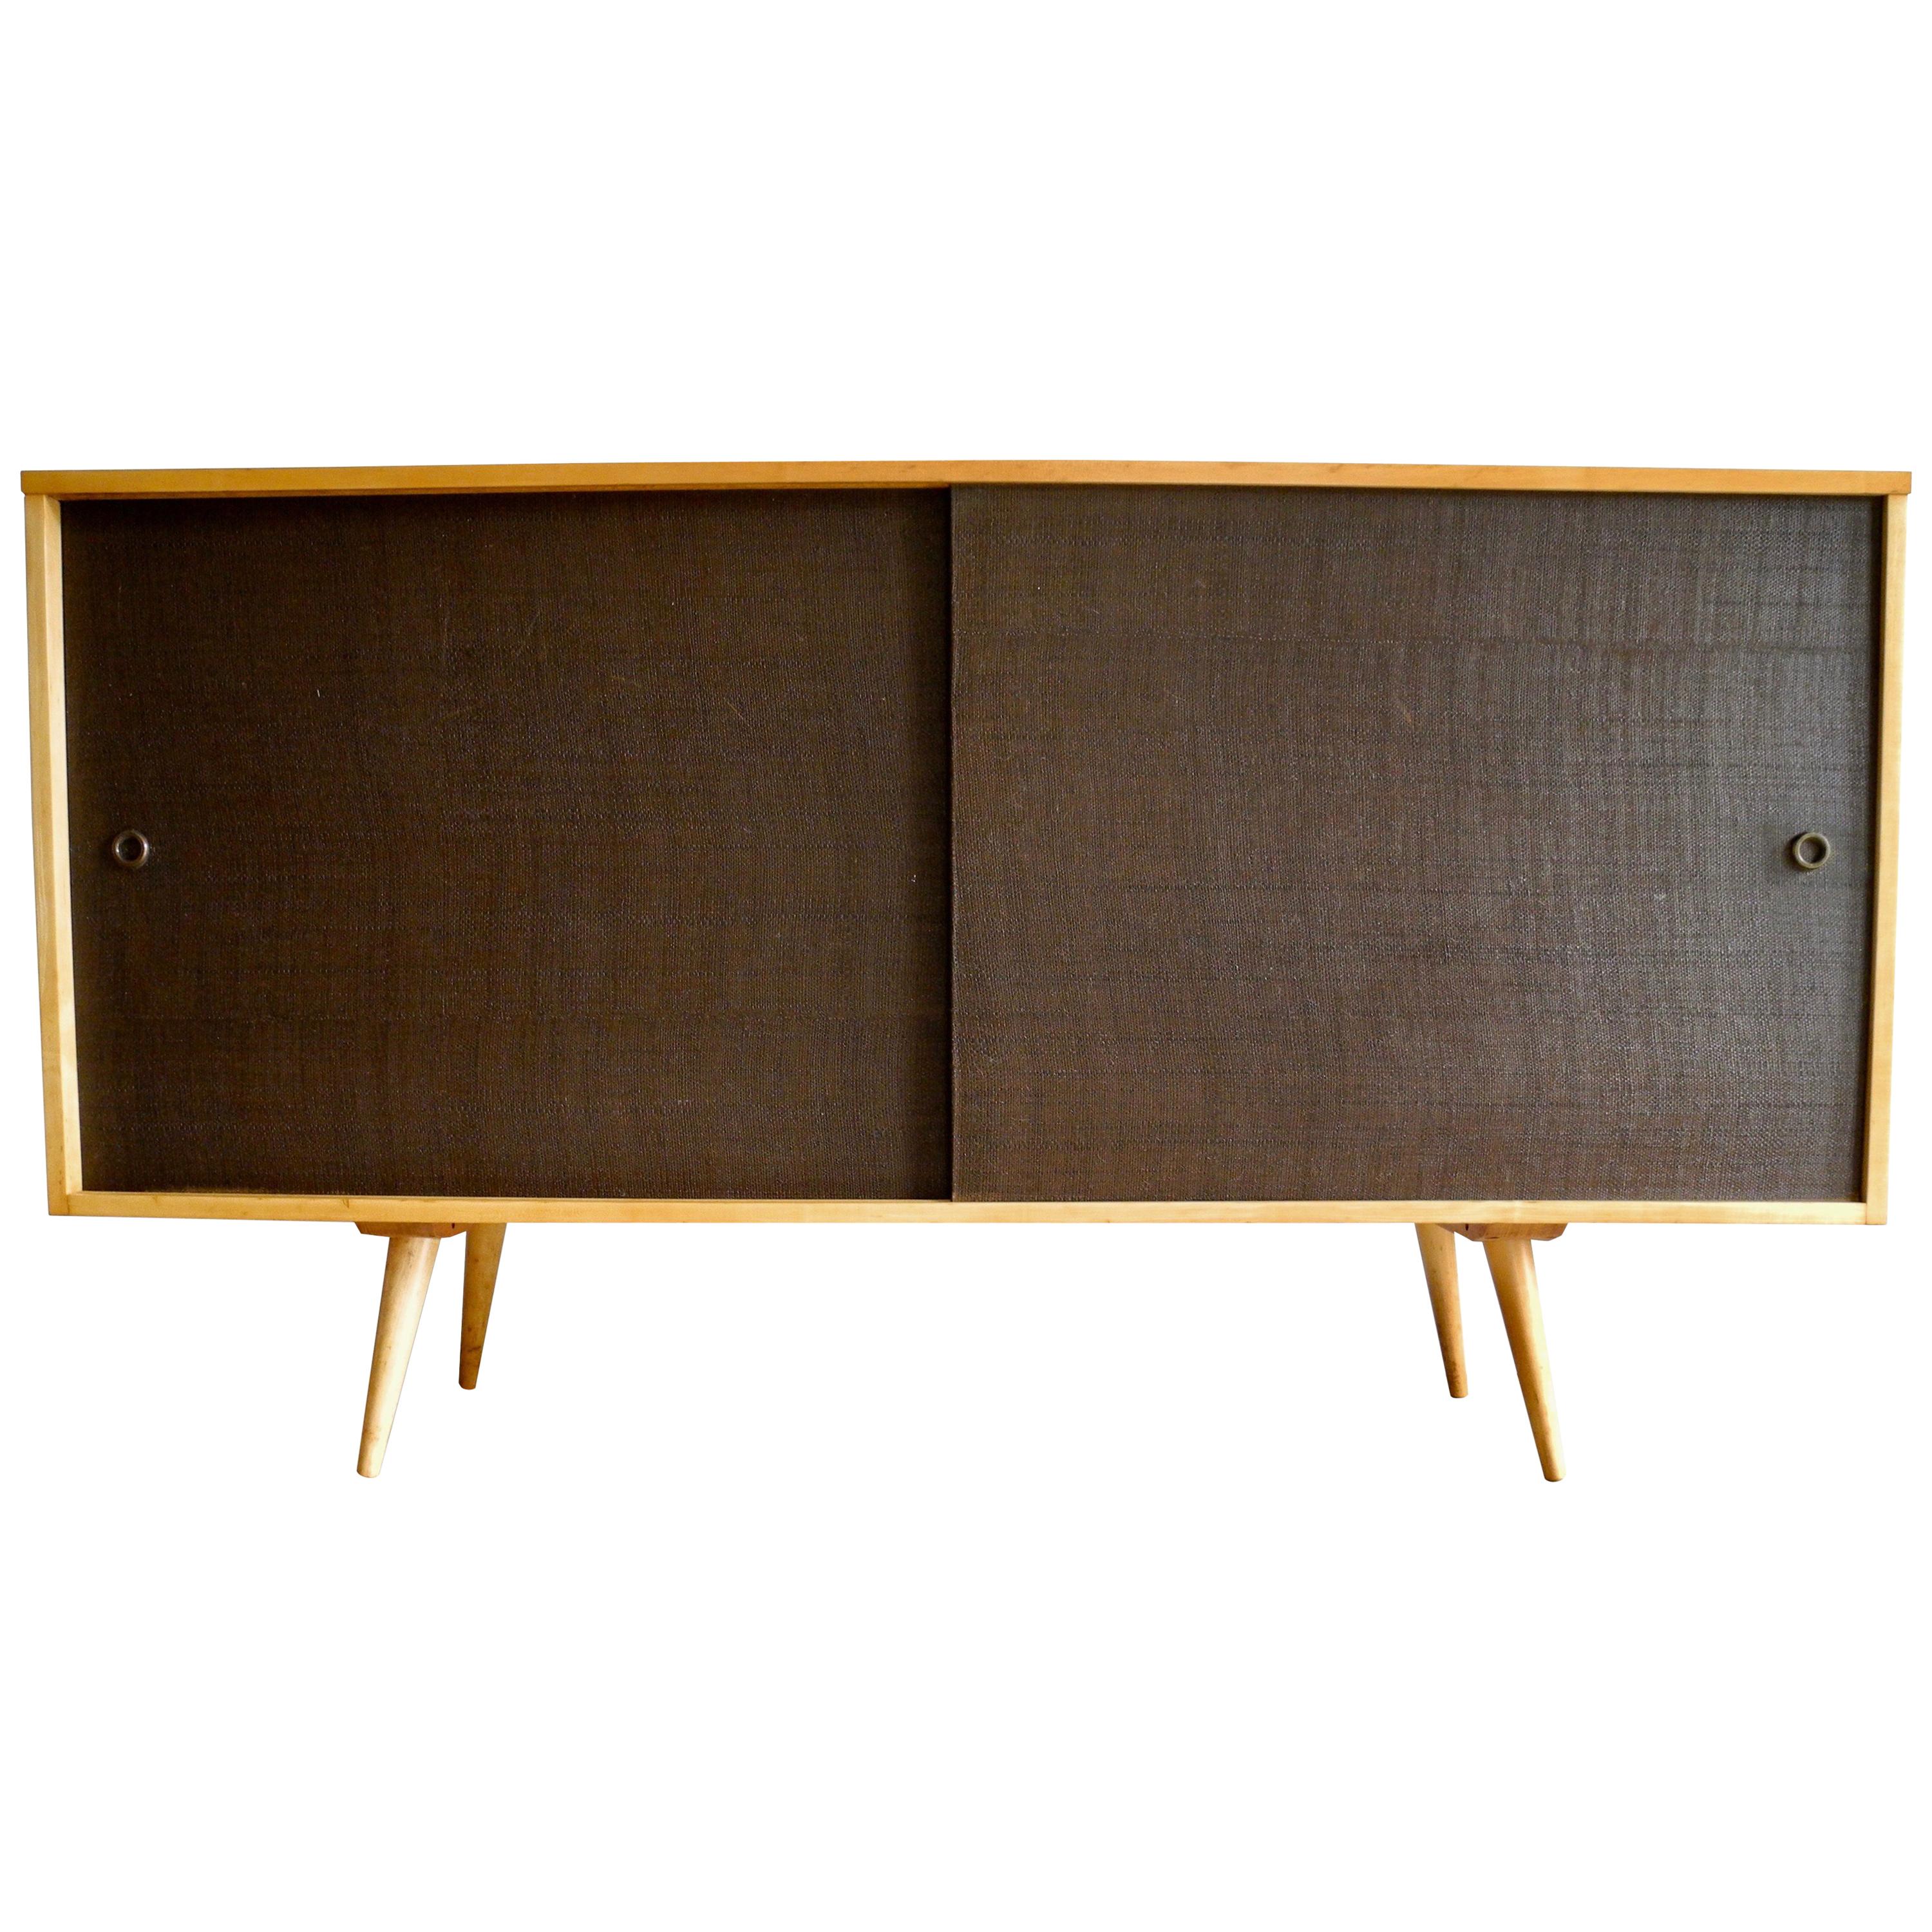 Mid-Century Modern Storage Sideboard in Maple with Brown Doors by Paul McCobb For Sale